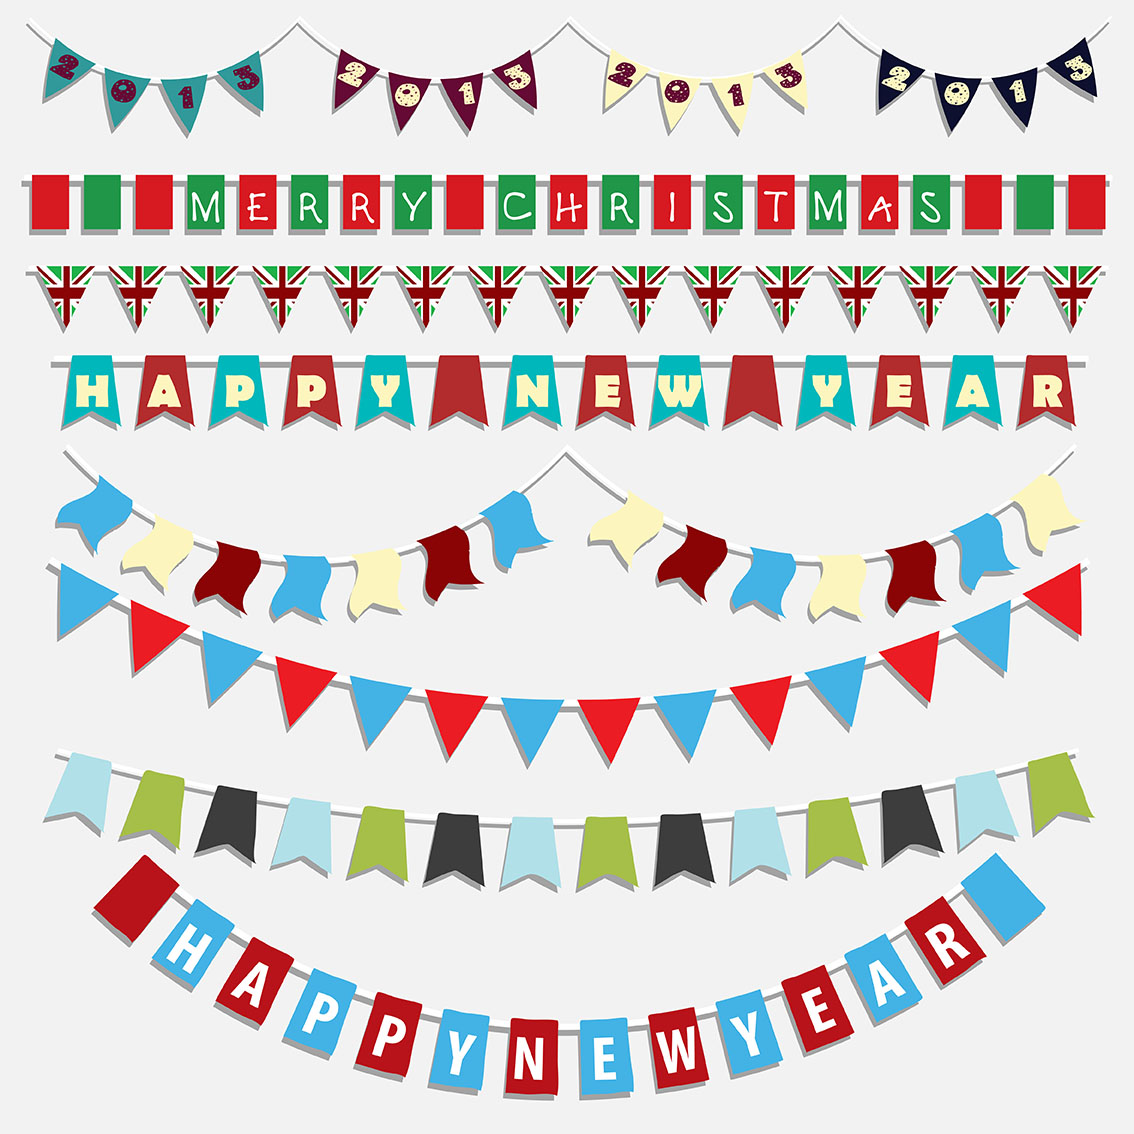 Happy New Year 2019 Fireworks Bright Bunting Banner 15 flags by PARTY DECOR